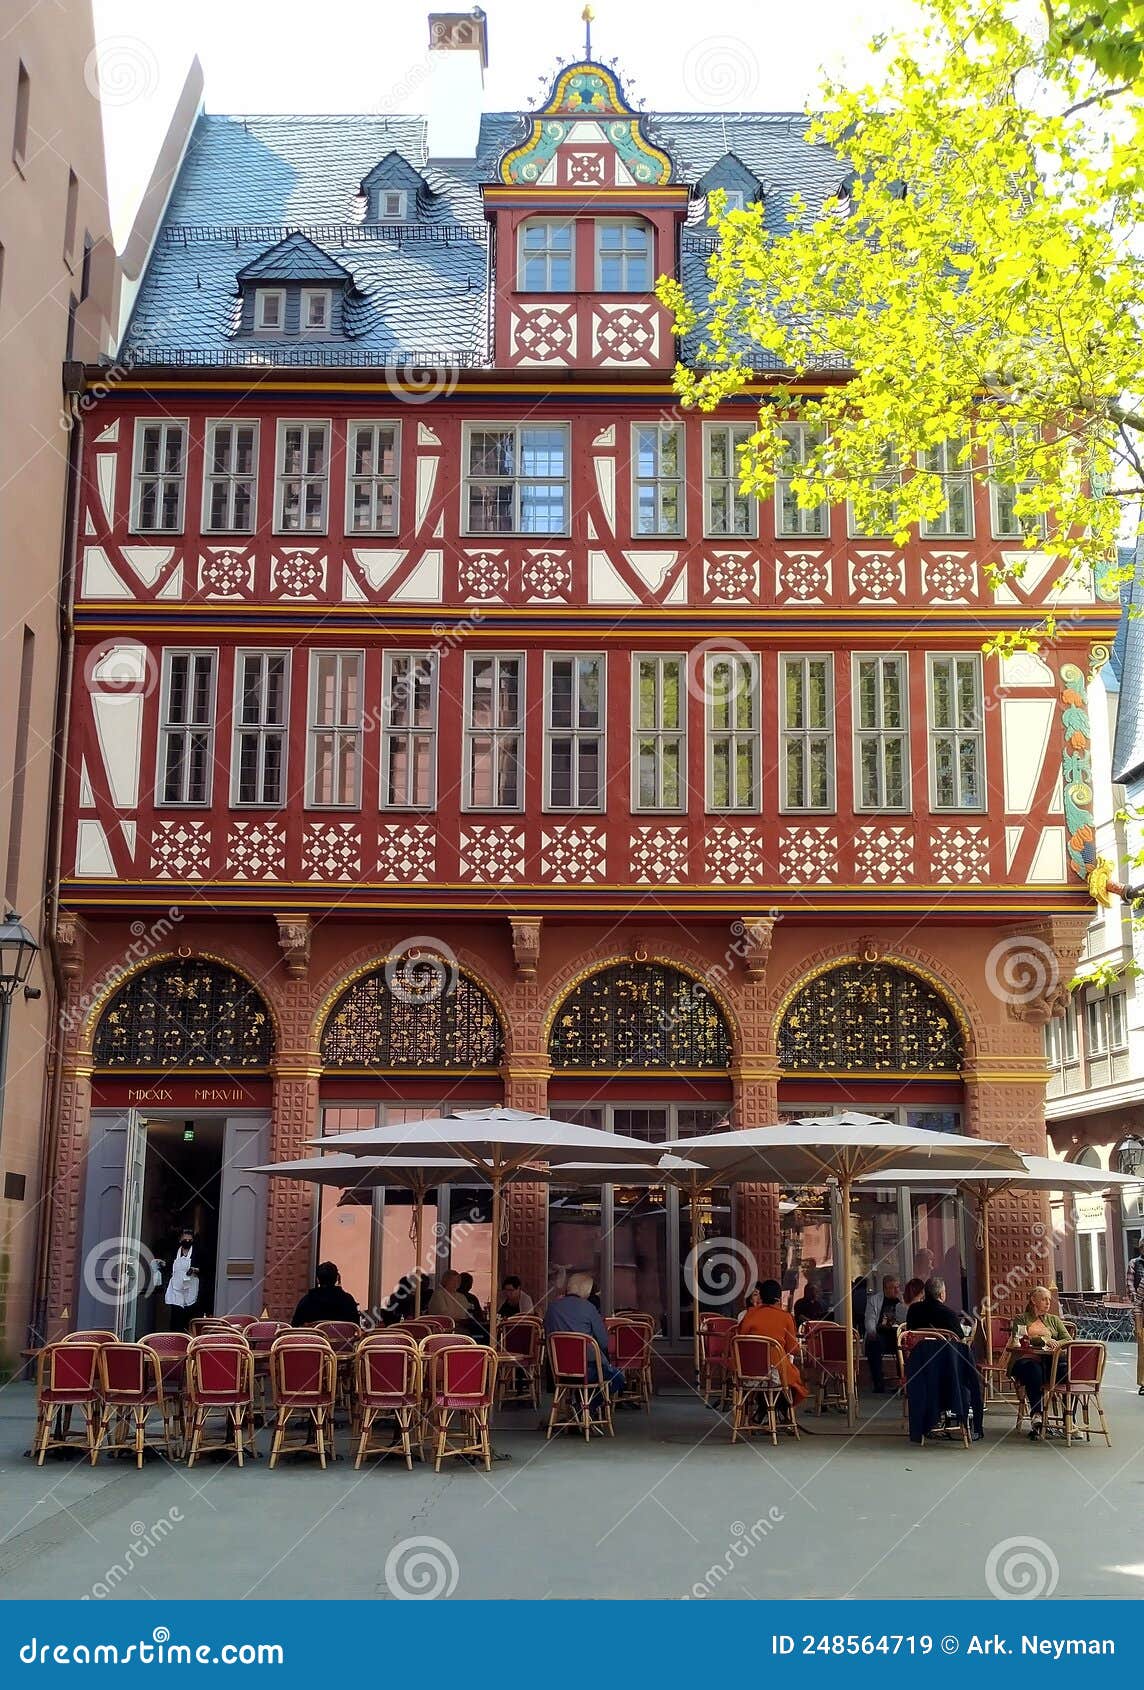 haus zur goldenen waage, medieval half-timbered house in the old town, frankfurt, germany